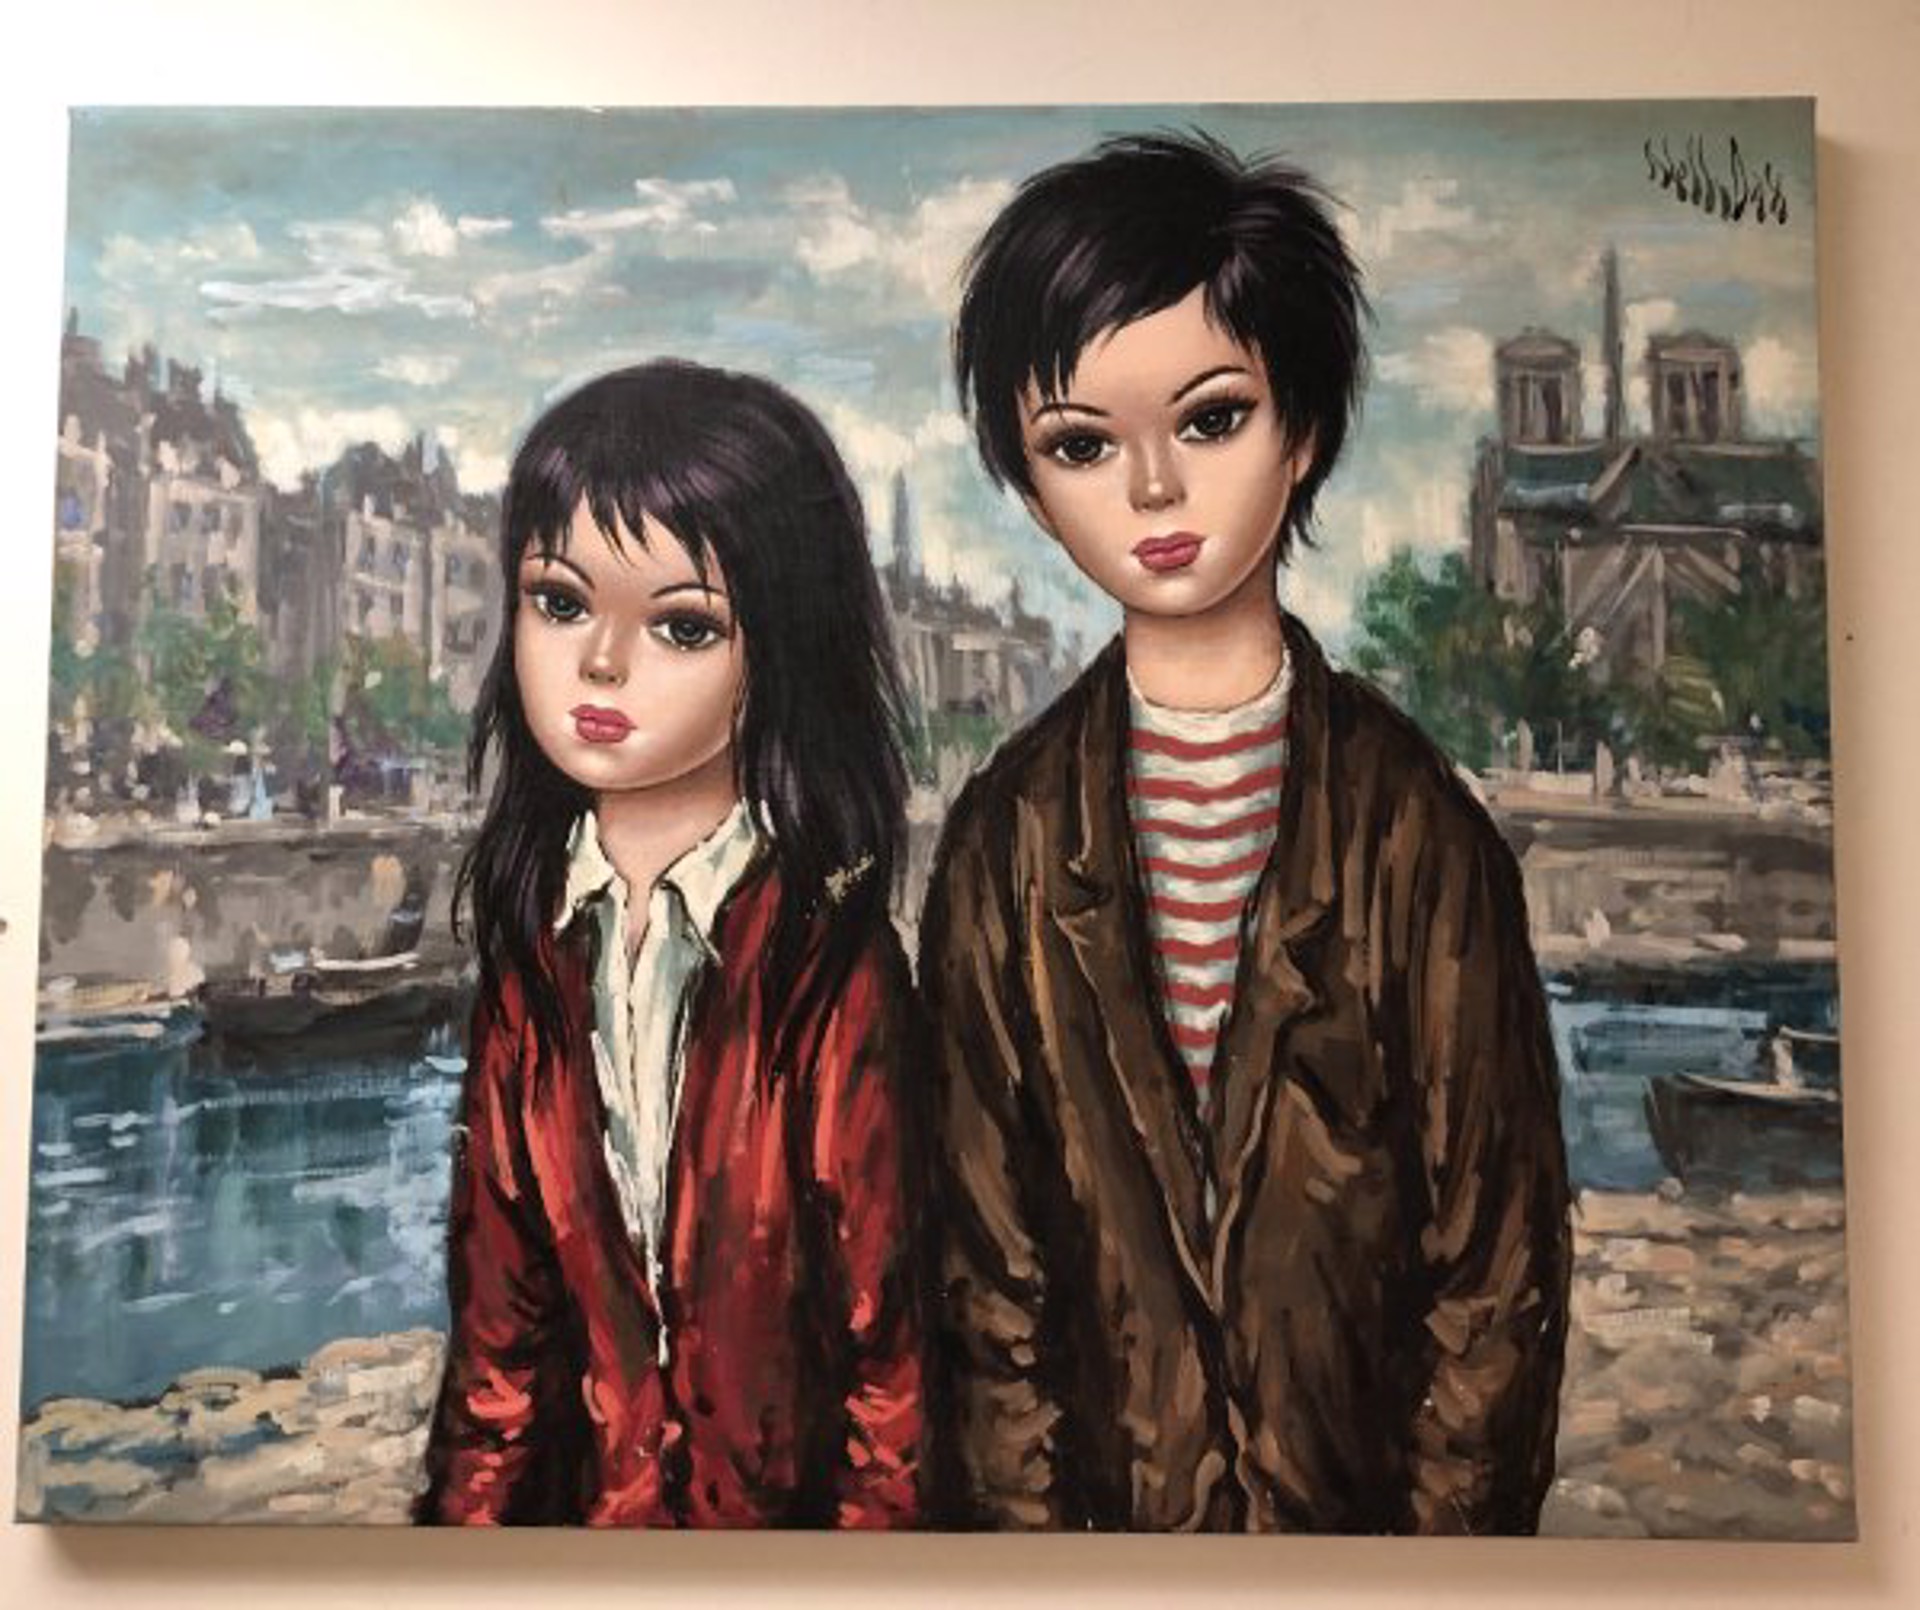 Girl and Boy by the Paris Sceine, Notre Dame by Nelly Dax